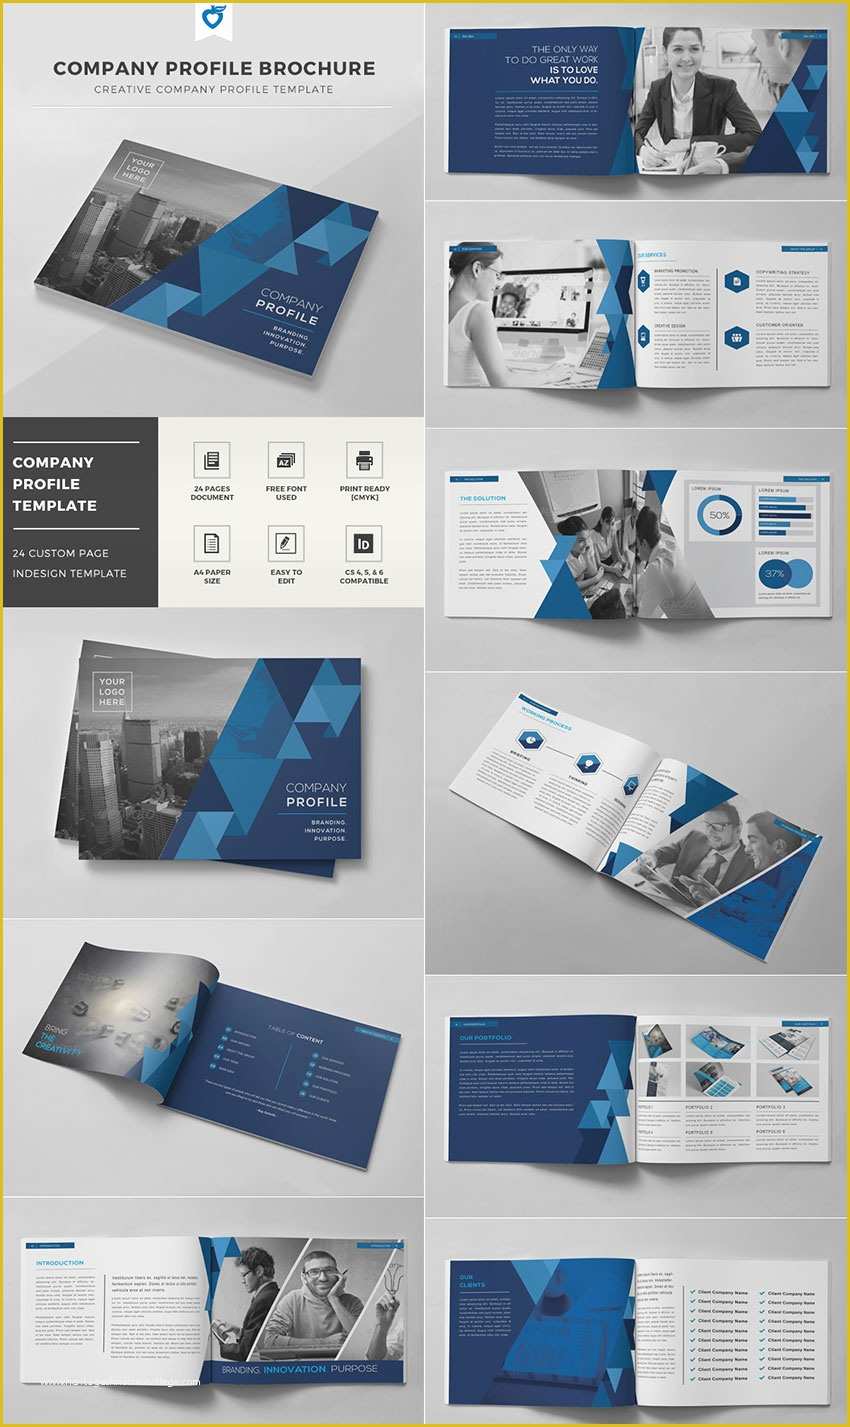 Free Indesign Brochure Templates Of 20 Best Indesign Brochure Templates for Creative